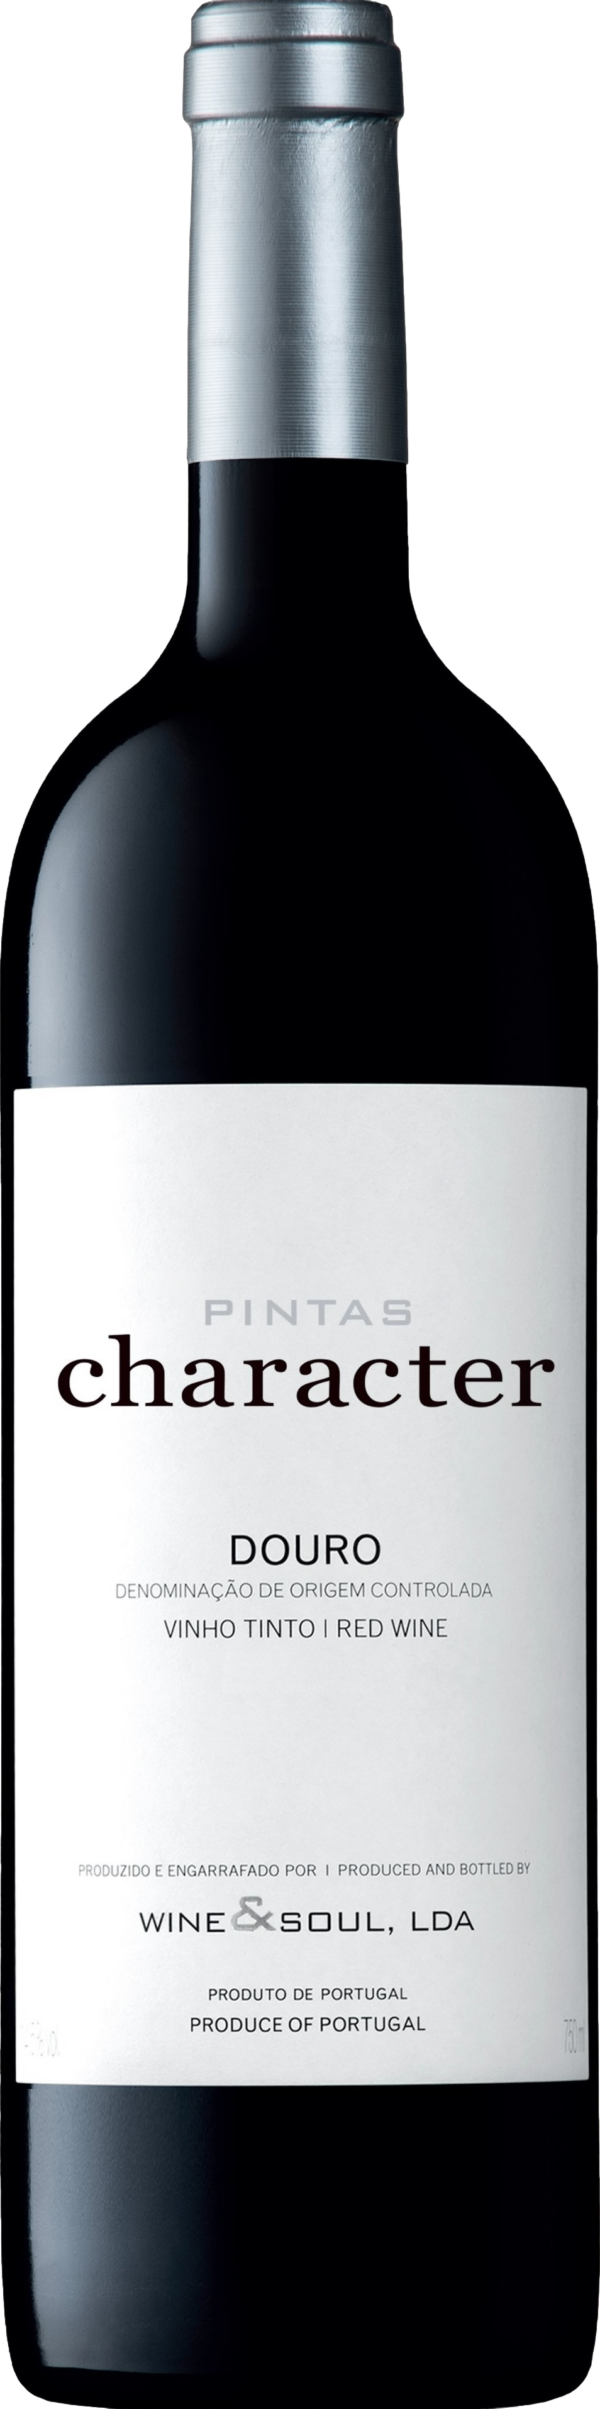 Product image of Wine & Soul Pintas Douro Character Tinto 2021 from 8wines